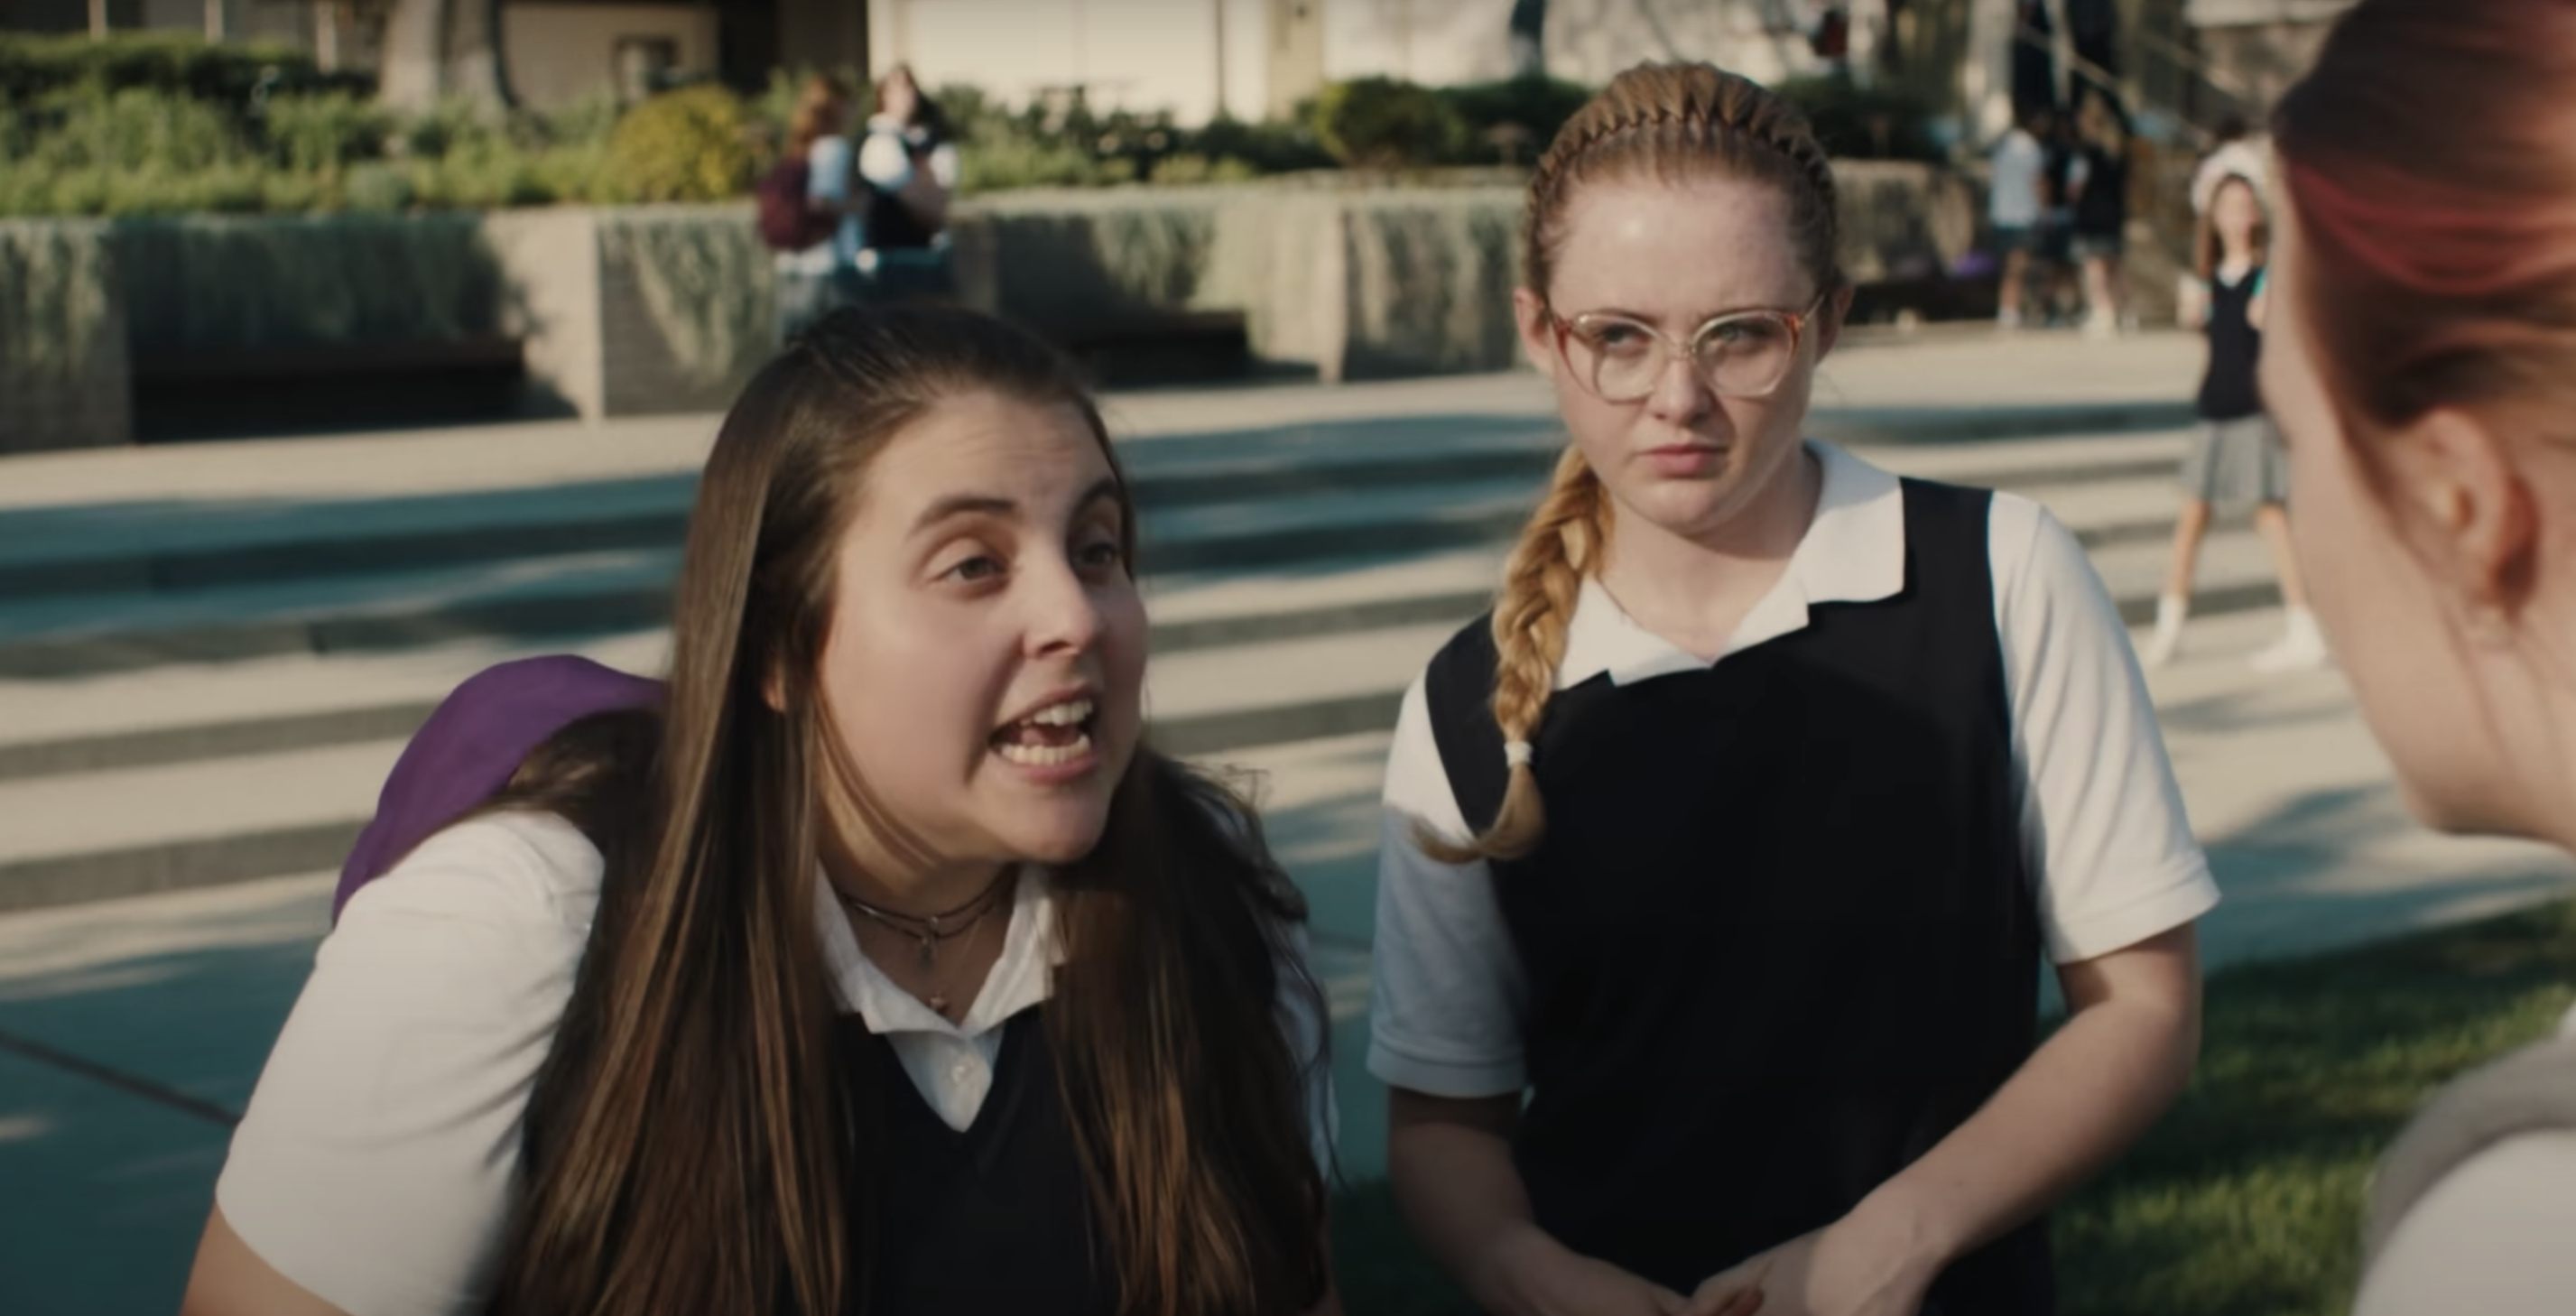 Beanie as Julie in &quot;Lady Bird&quot;